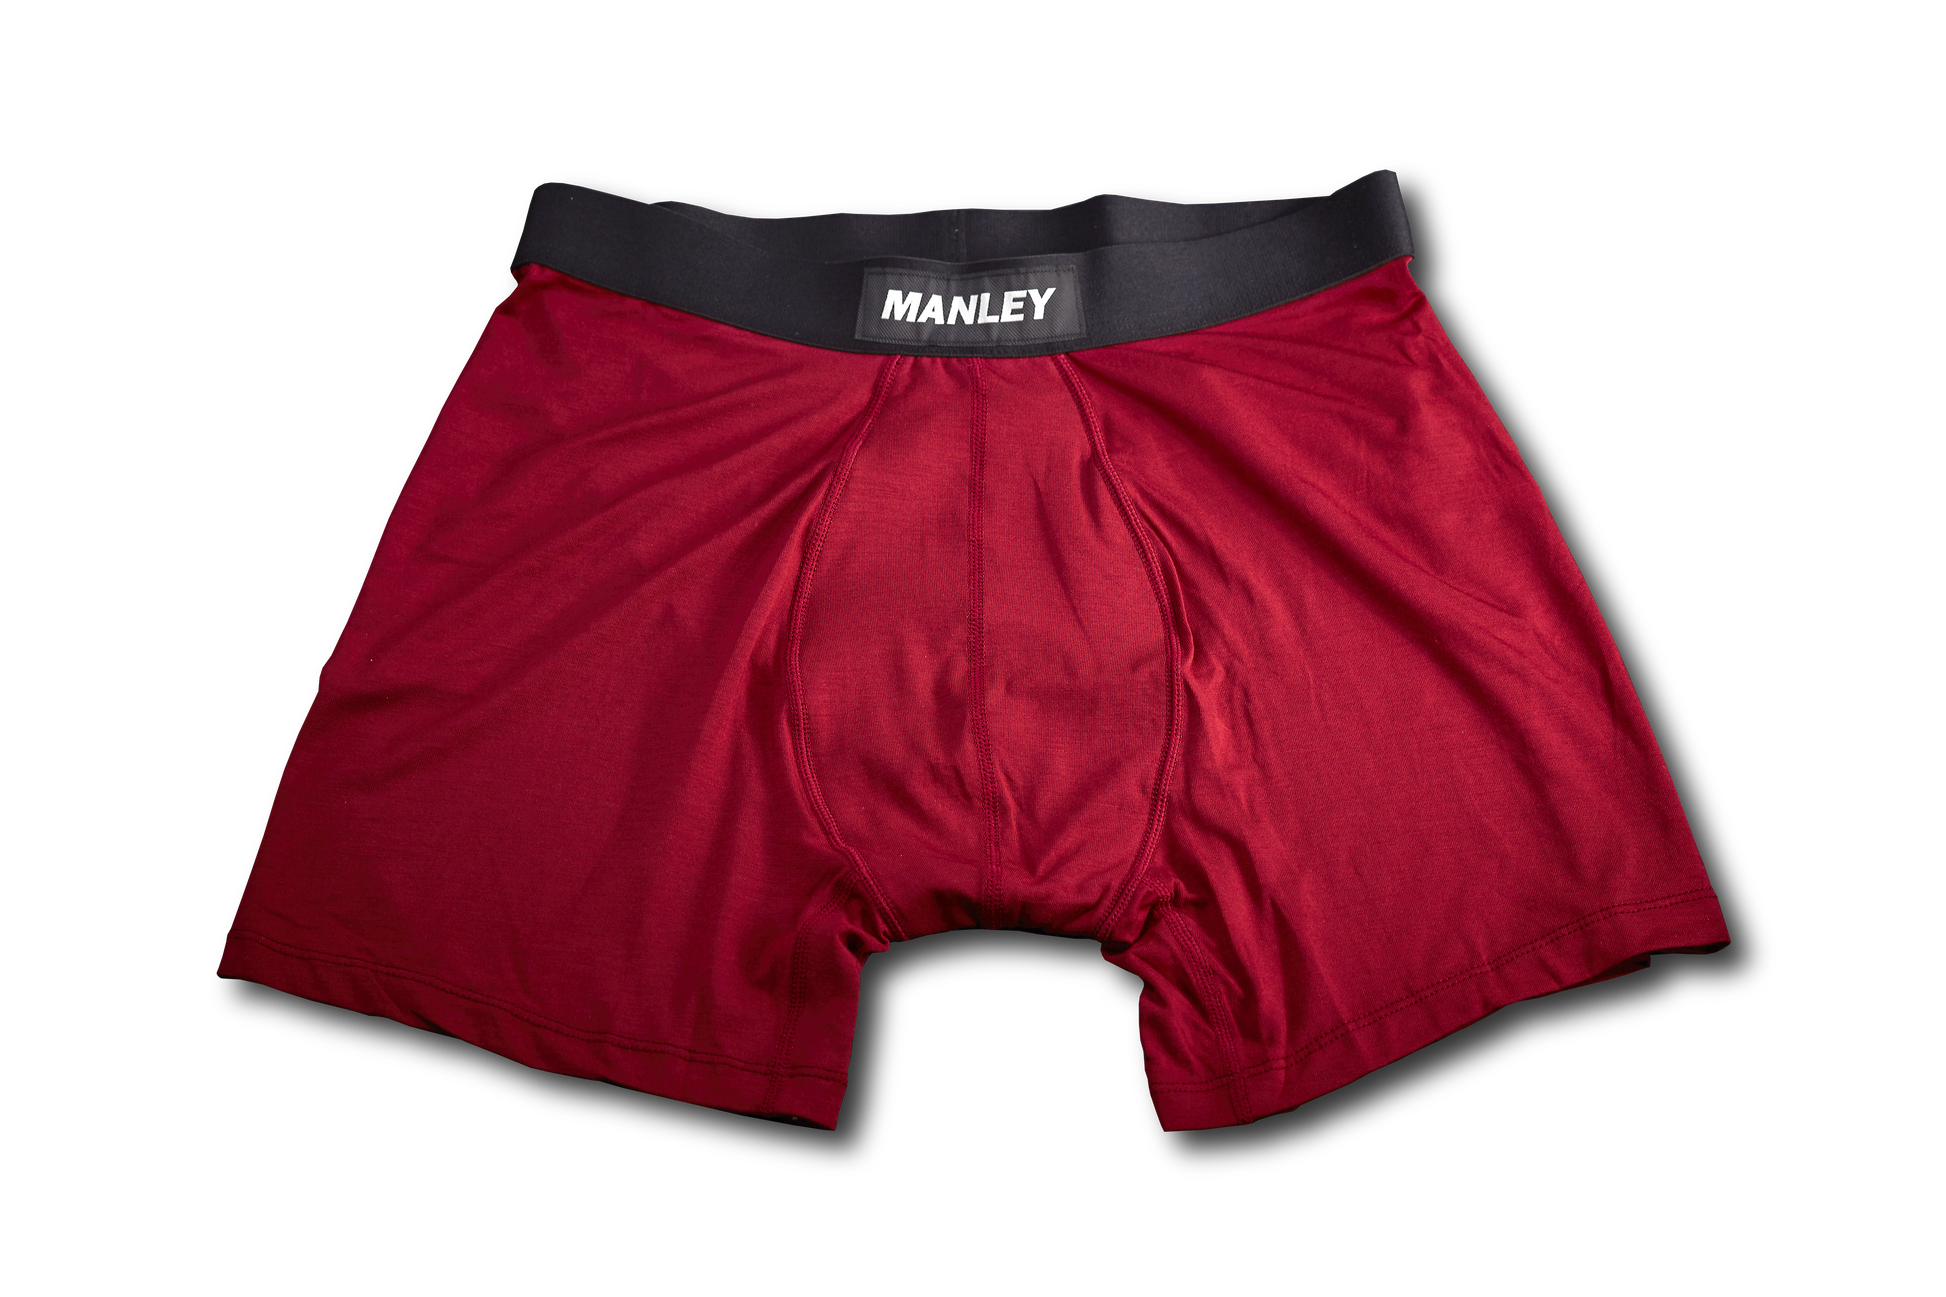 Red Manley boxer briefs lying flat. Shows the Manley logo on the waistband. 